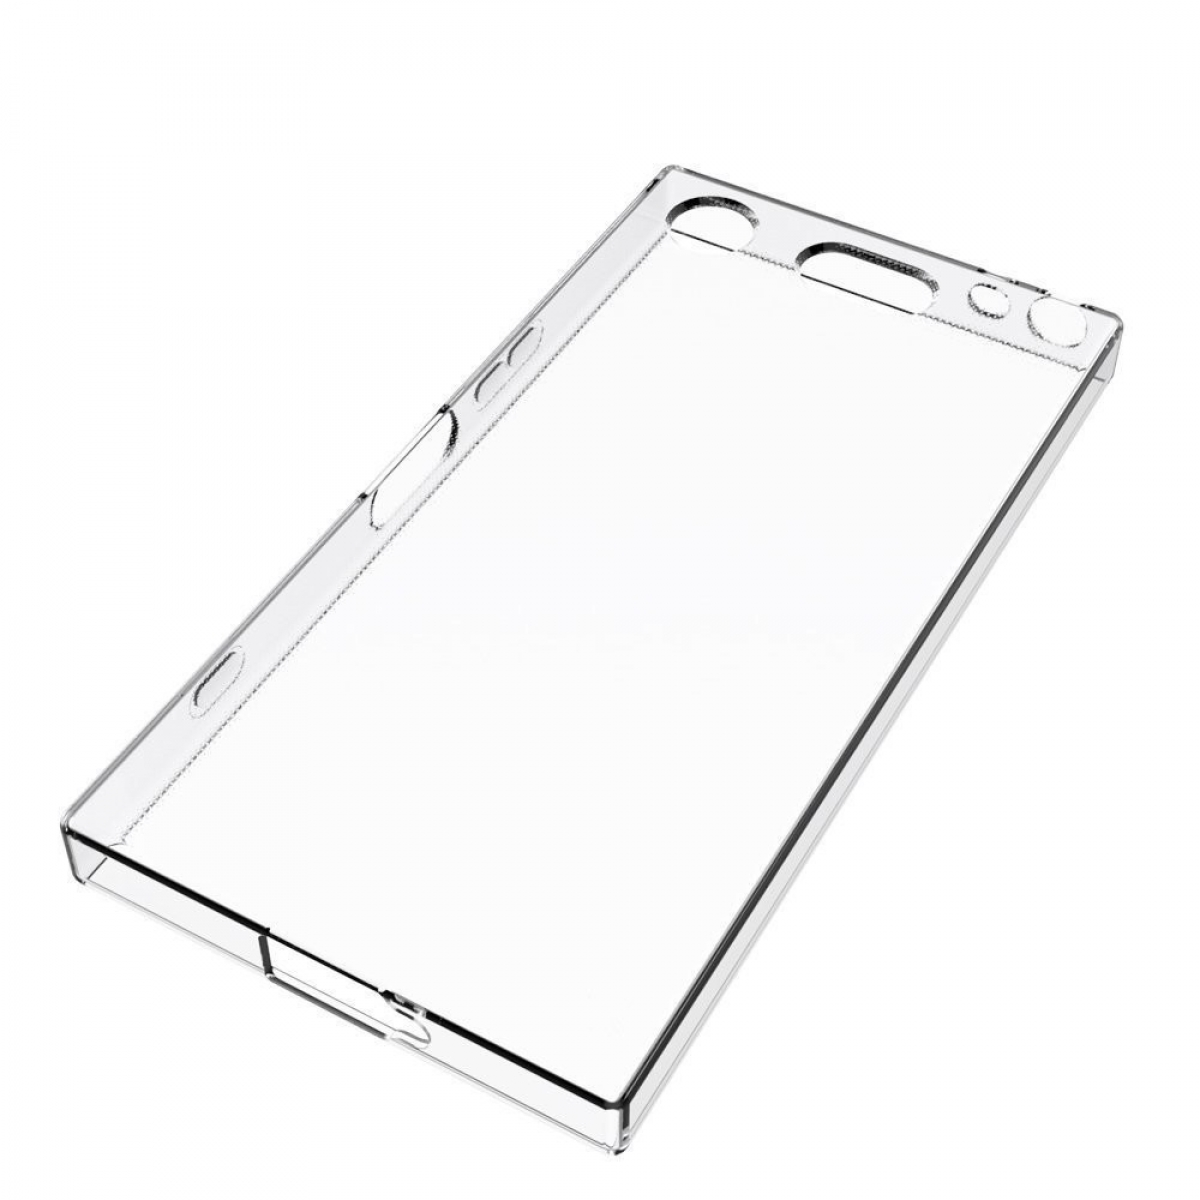 Xperia XZ1 Backcover, Compact, CA4, Transparent CASEONLINE Sony,